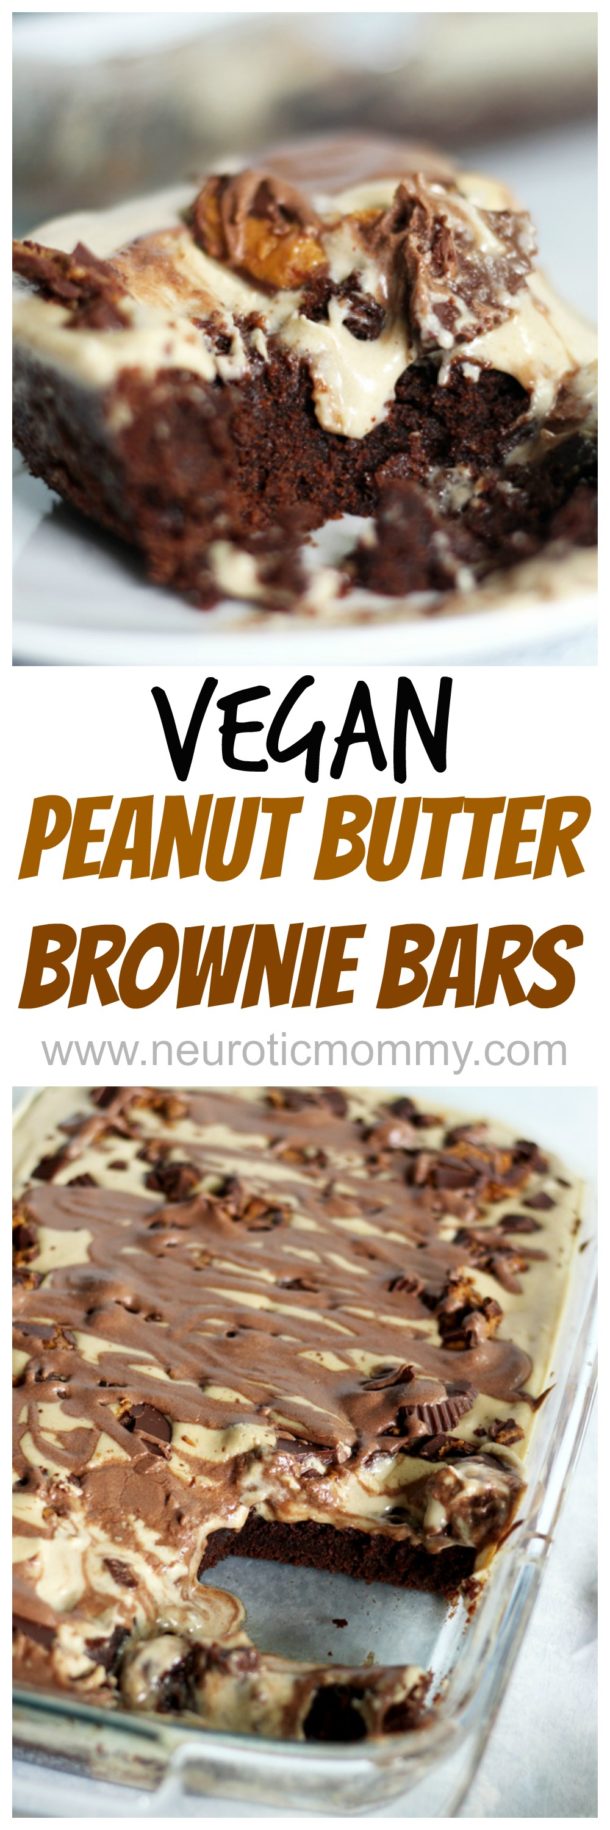 Peanut Butter Brownie Bars - NeuroticMommy